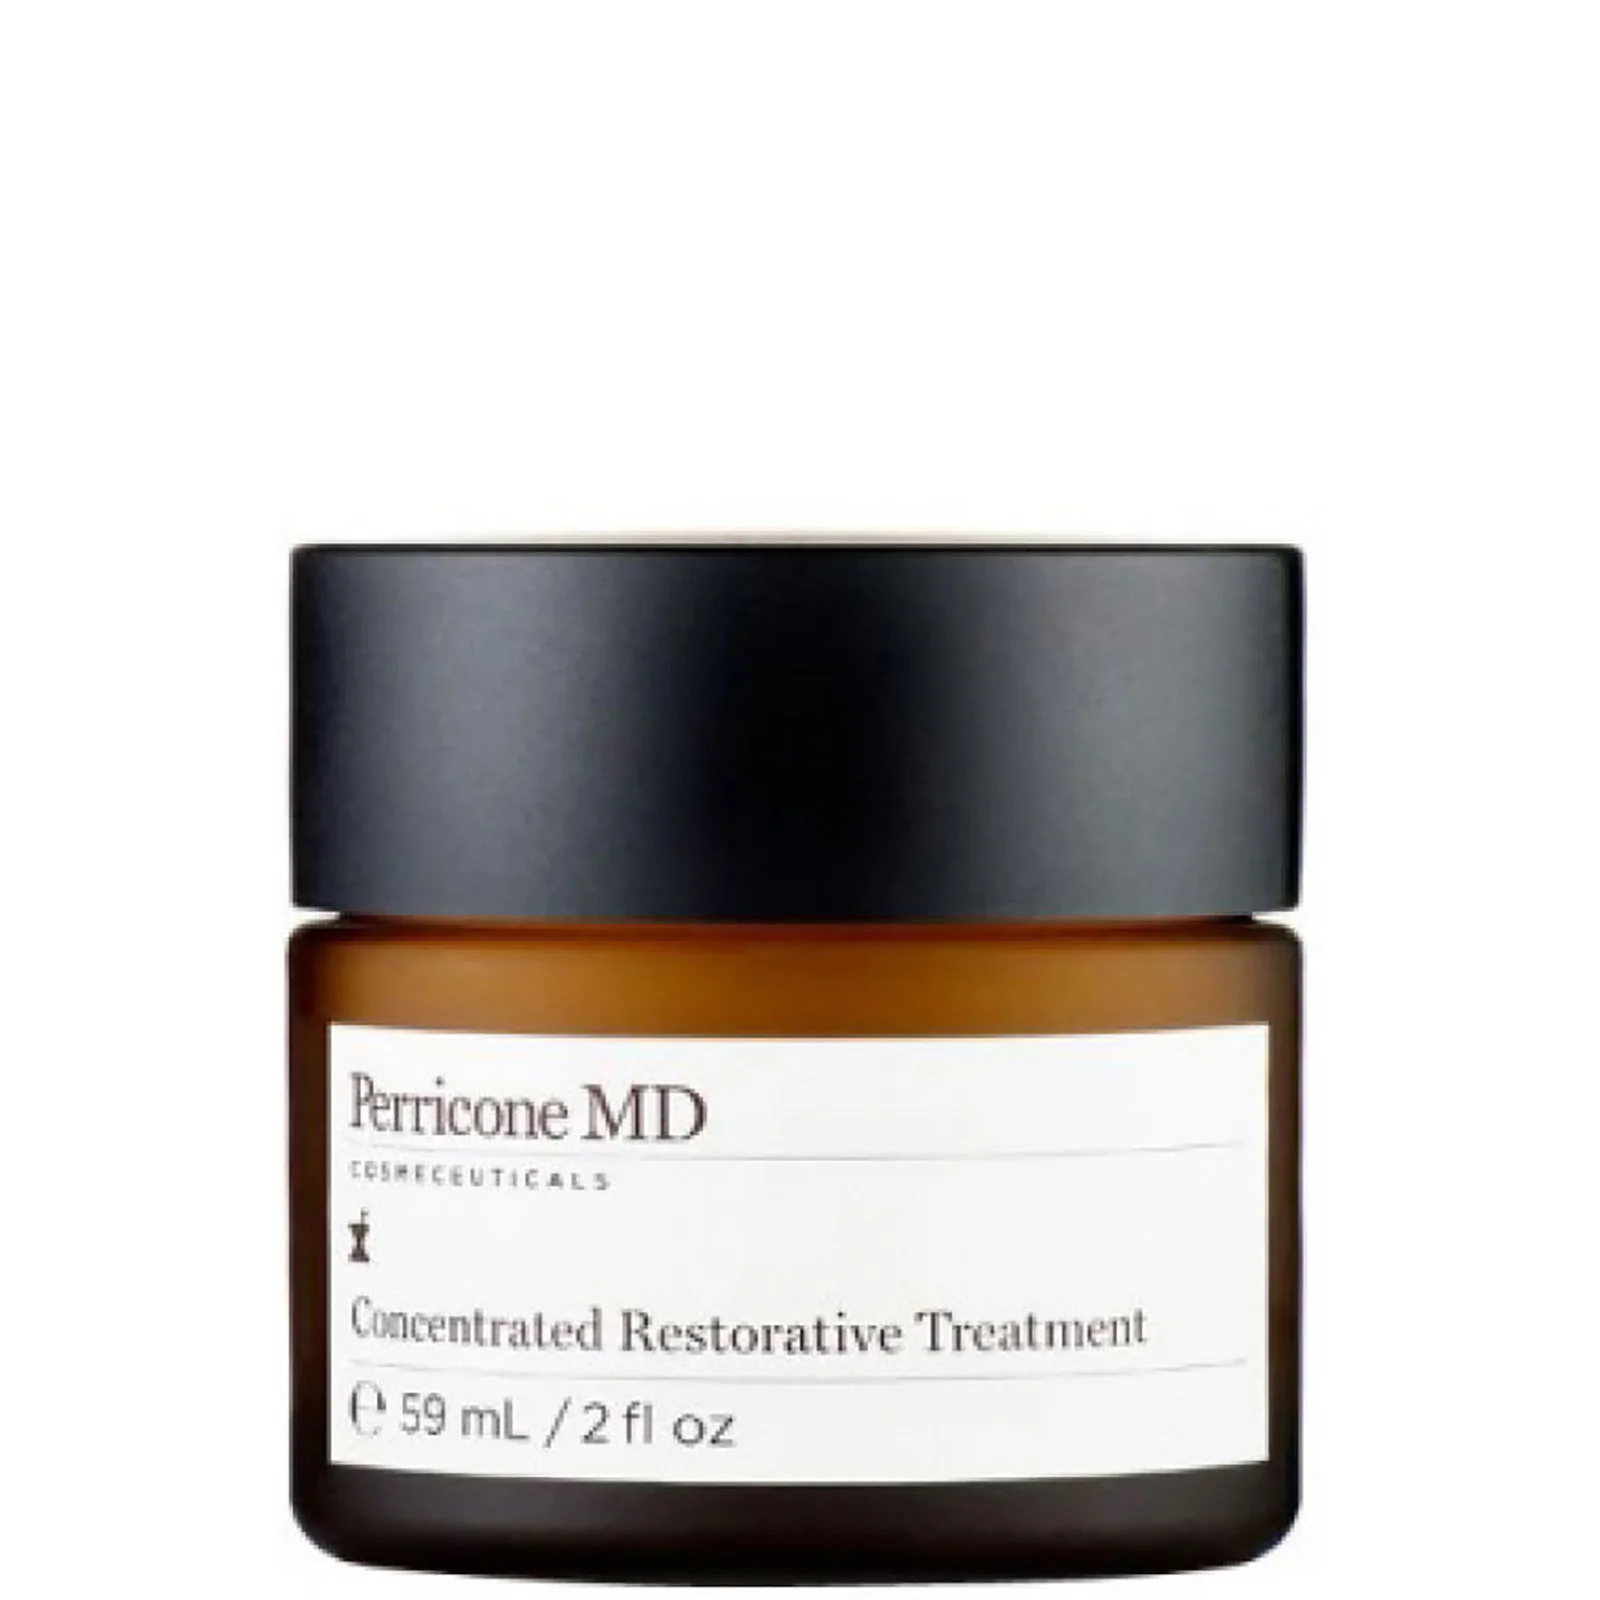 Perricone Md Concentrated Restorative Treatment (59ml) Image 1